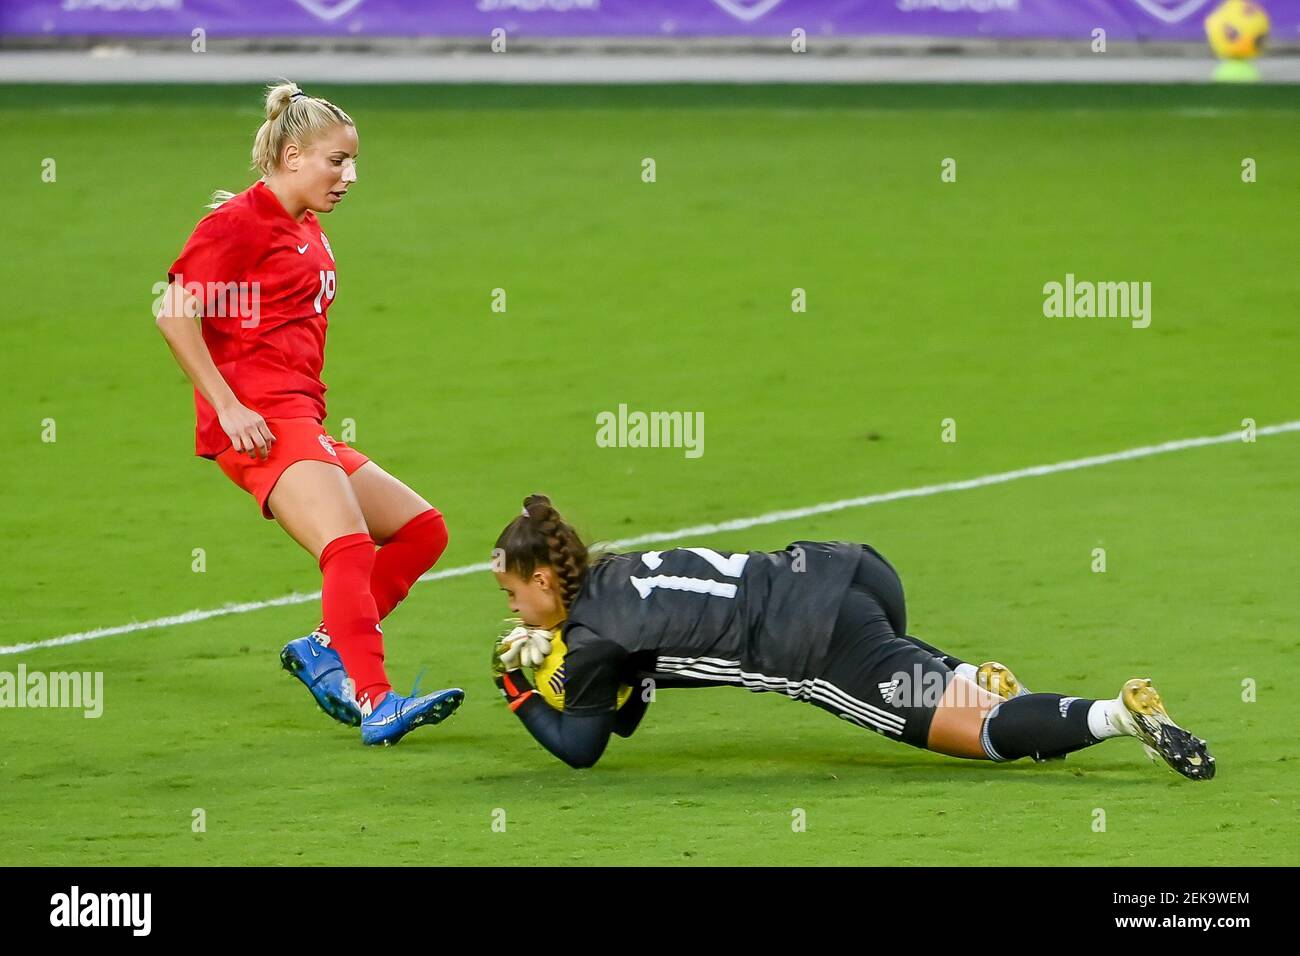 Orlando, United States. 21st Feb, 2021. Goalkeeper Laurina Oliveros (#12 Argentina) defending the goal during the SheBelieves Cup International Womens match between Argentina and Canada at Exploria Stadium in Orlando, Florida. Credit: SPP Sport Press Photo. /Alamy Live News Stock Photo